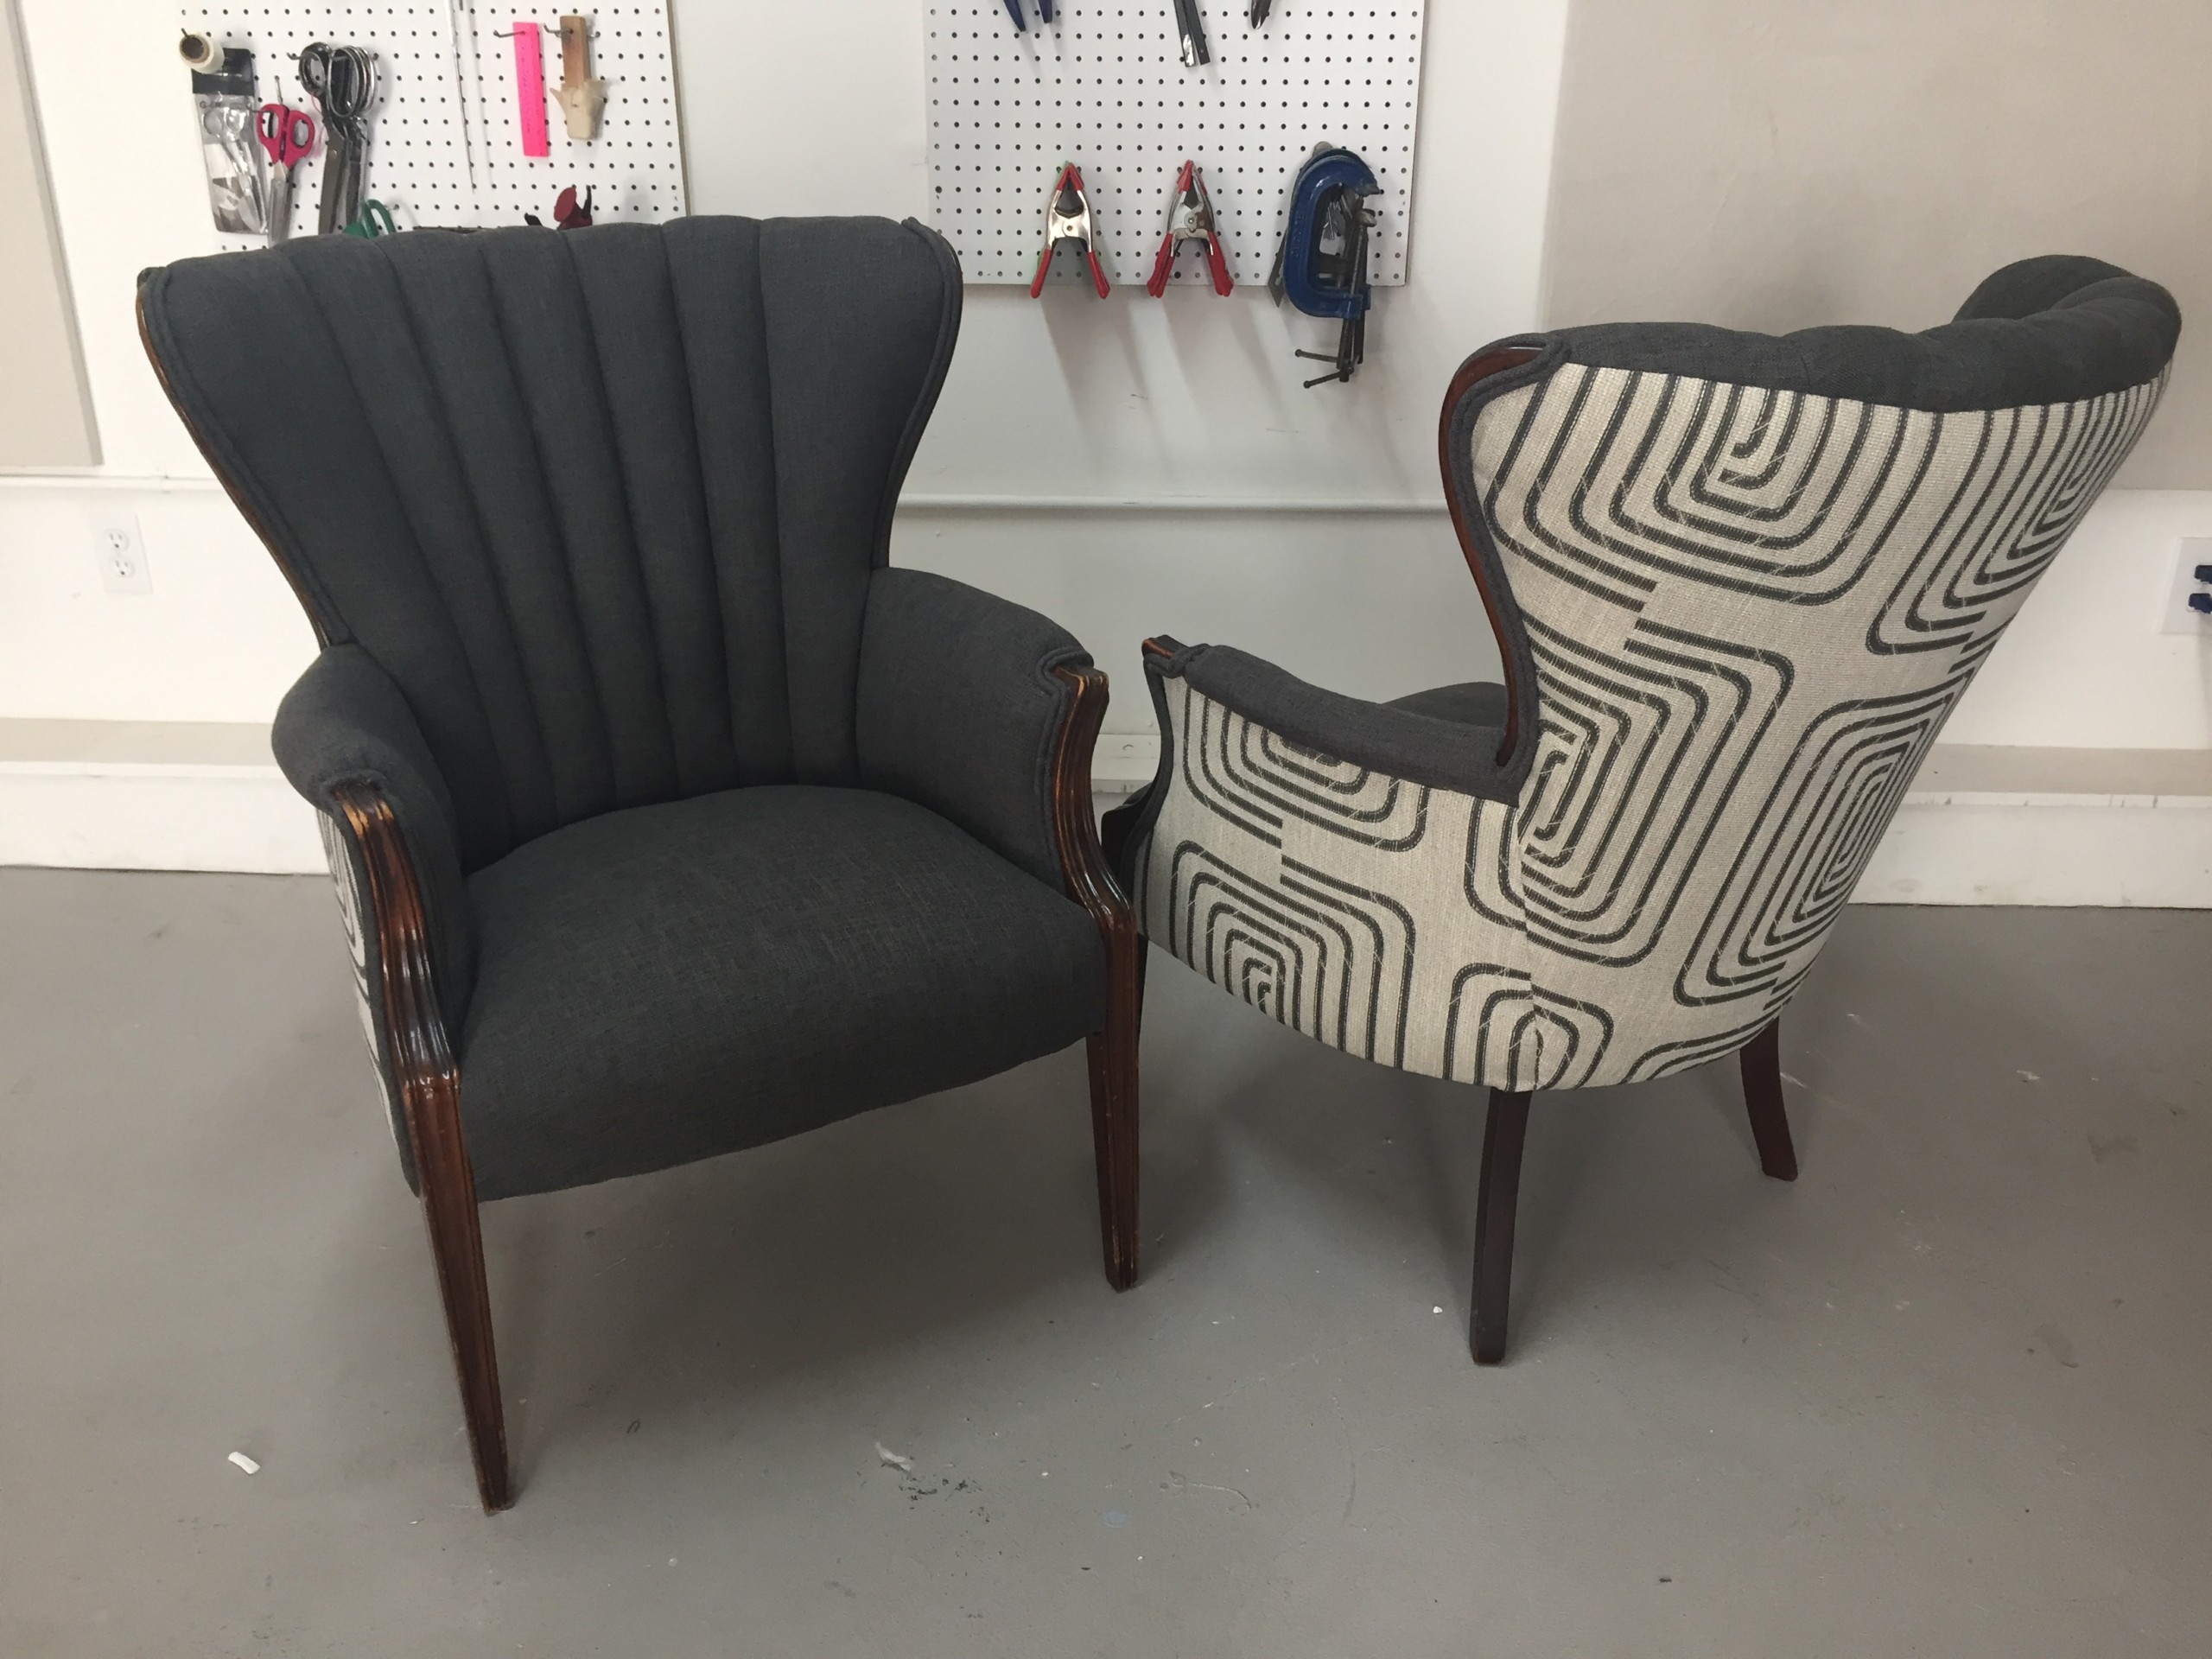 Vintage Channel Back Chairs